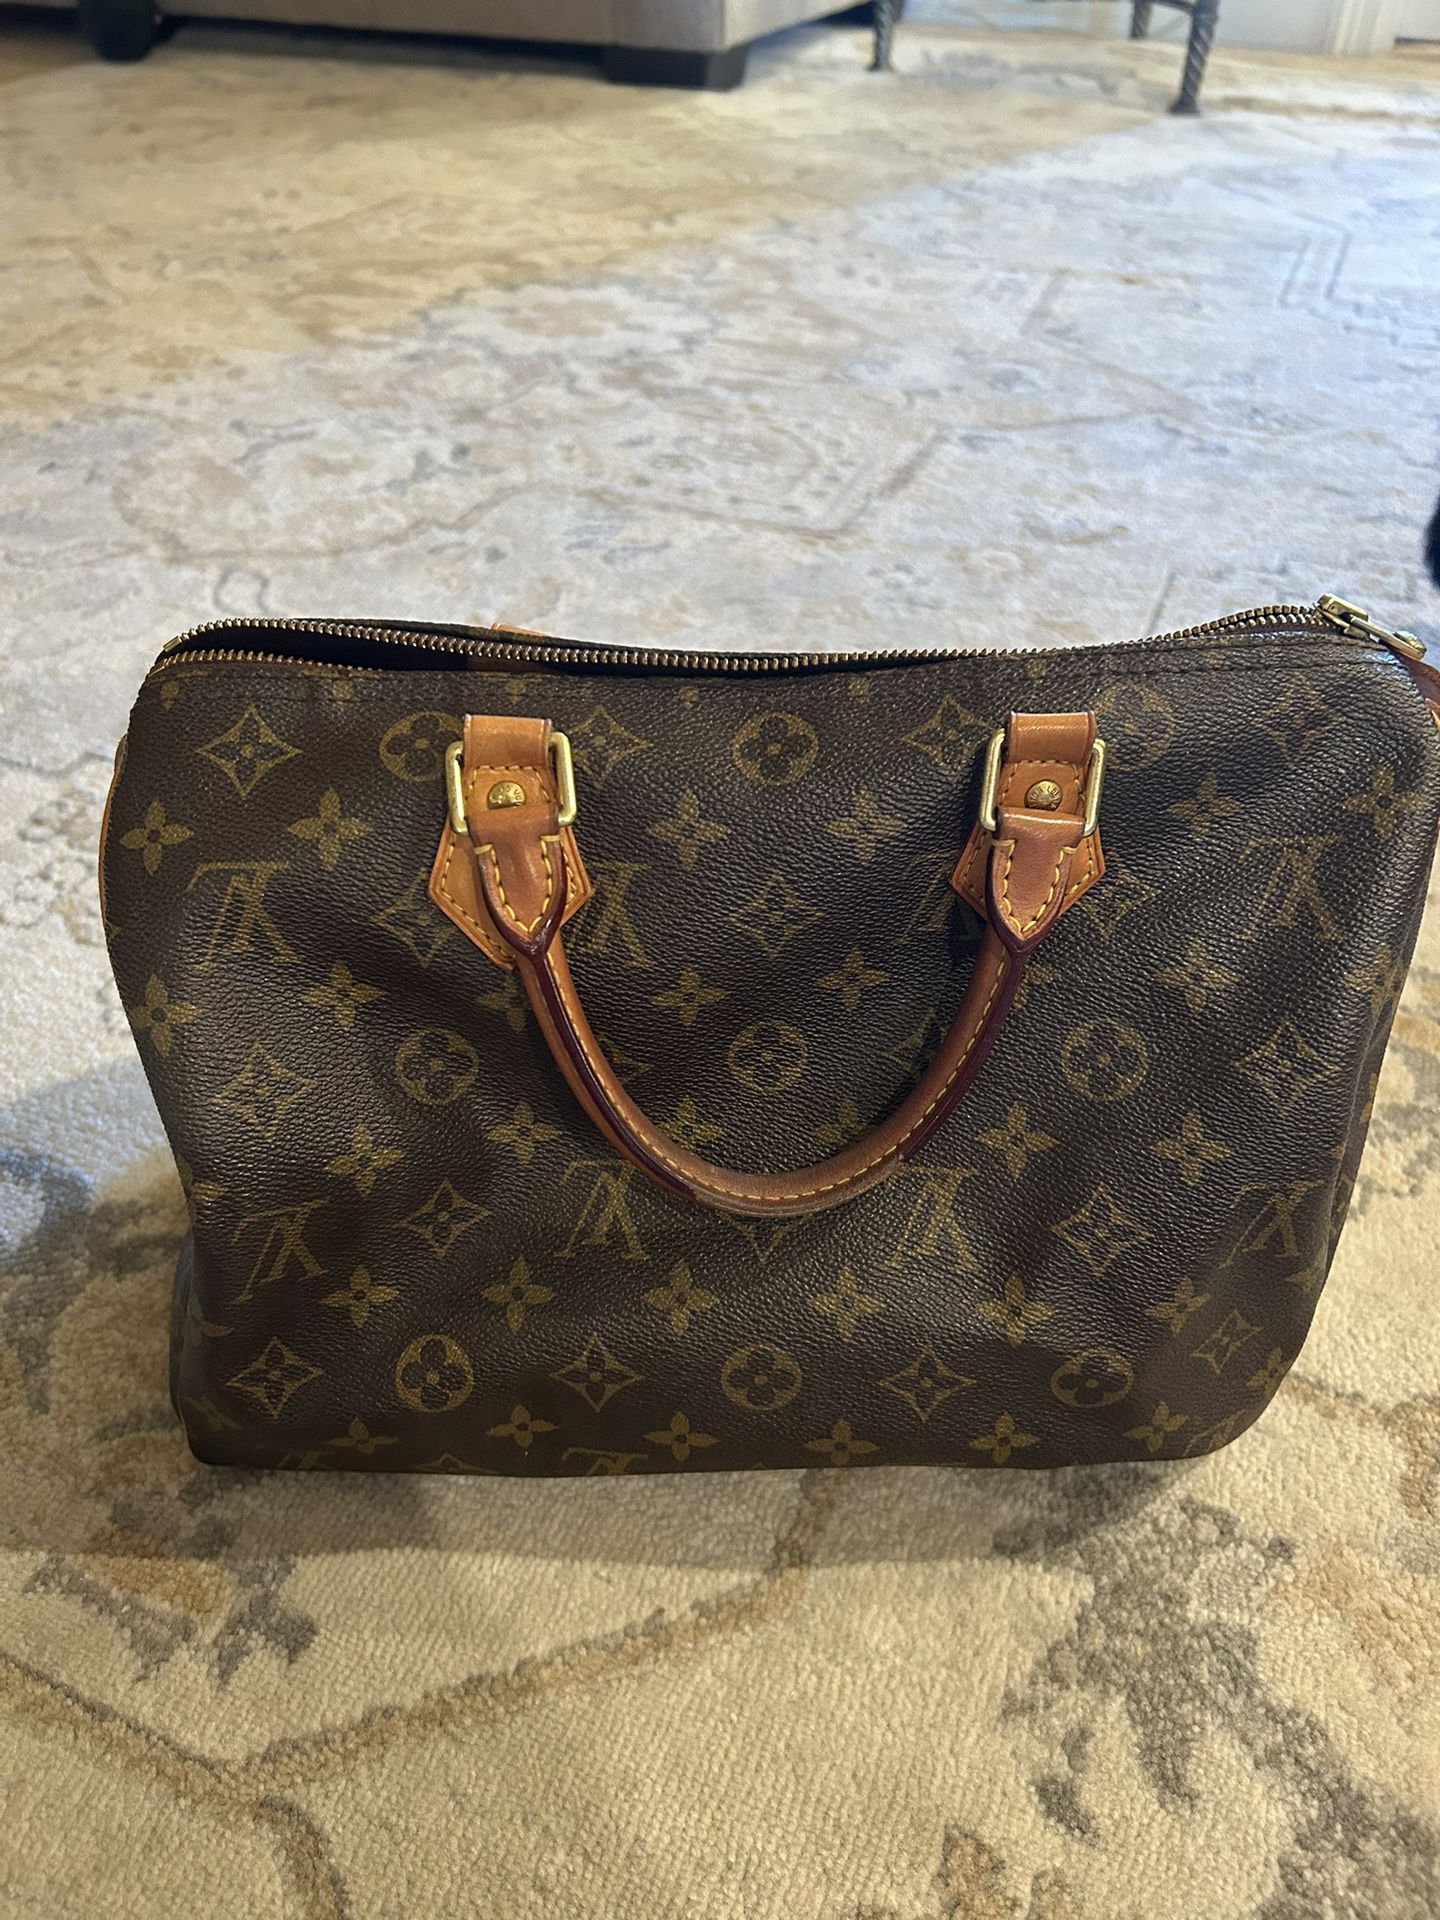 Authentic Louis Vuitton Handbag Not Fake for Sale in Portland, OR